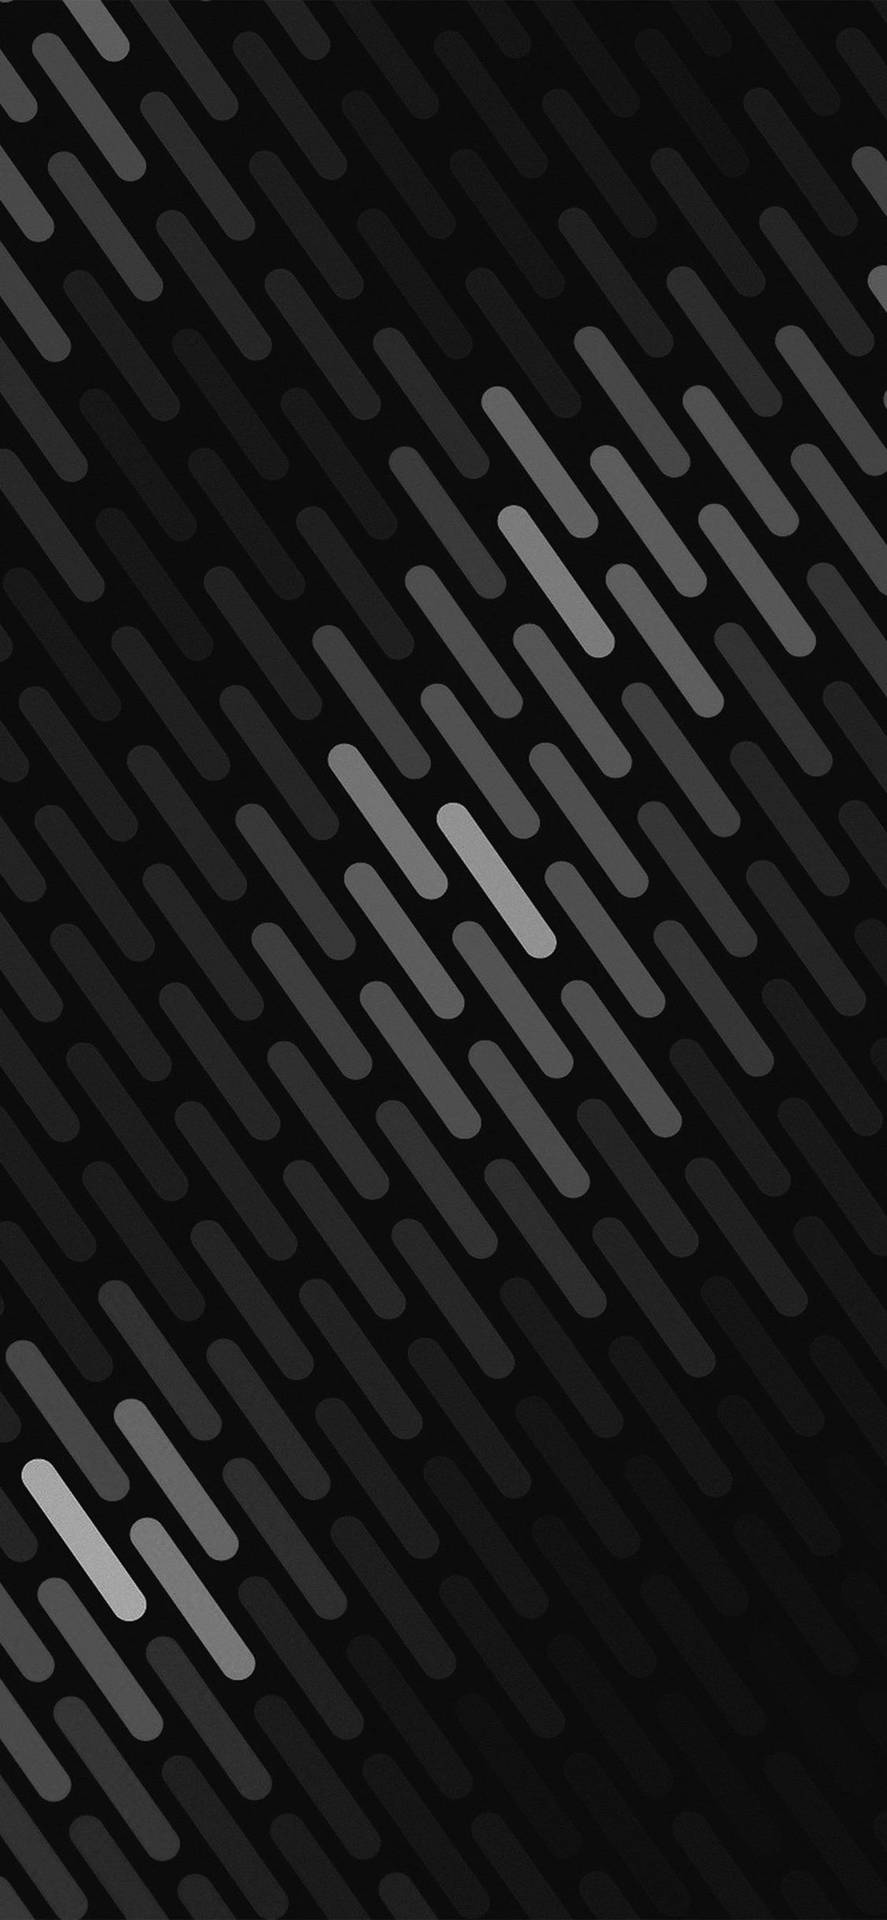 Woven Black And Grey Iphone Background